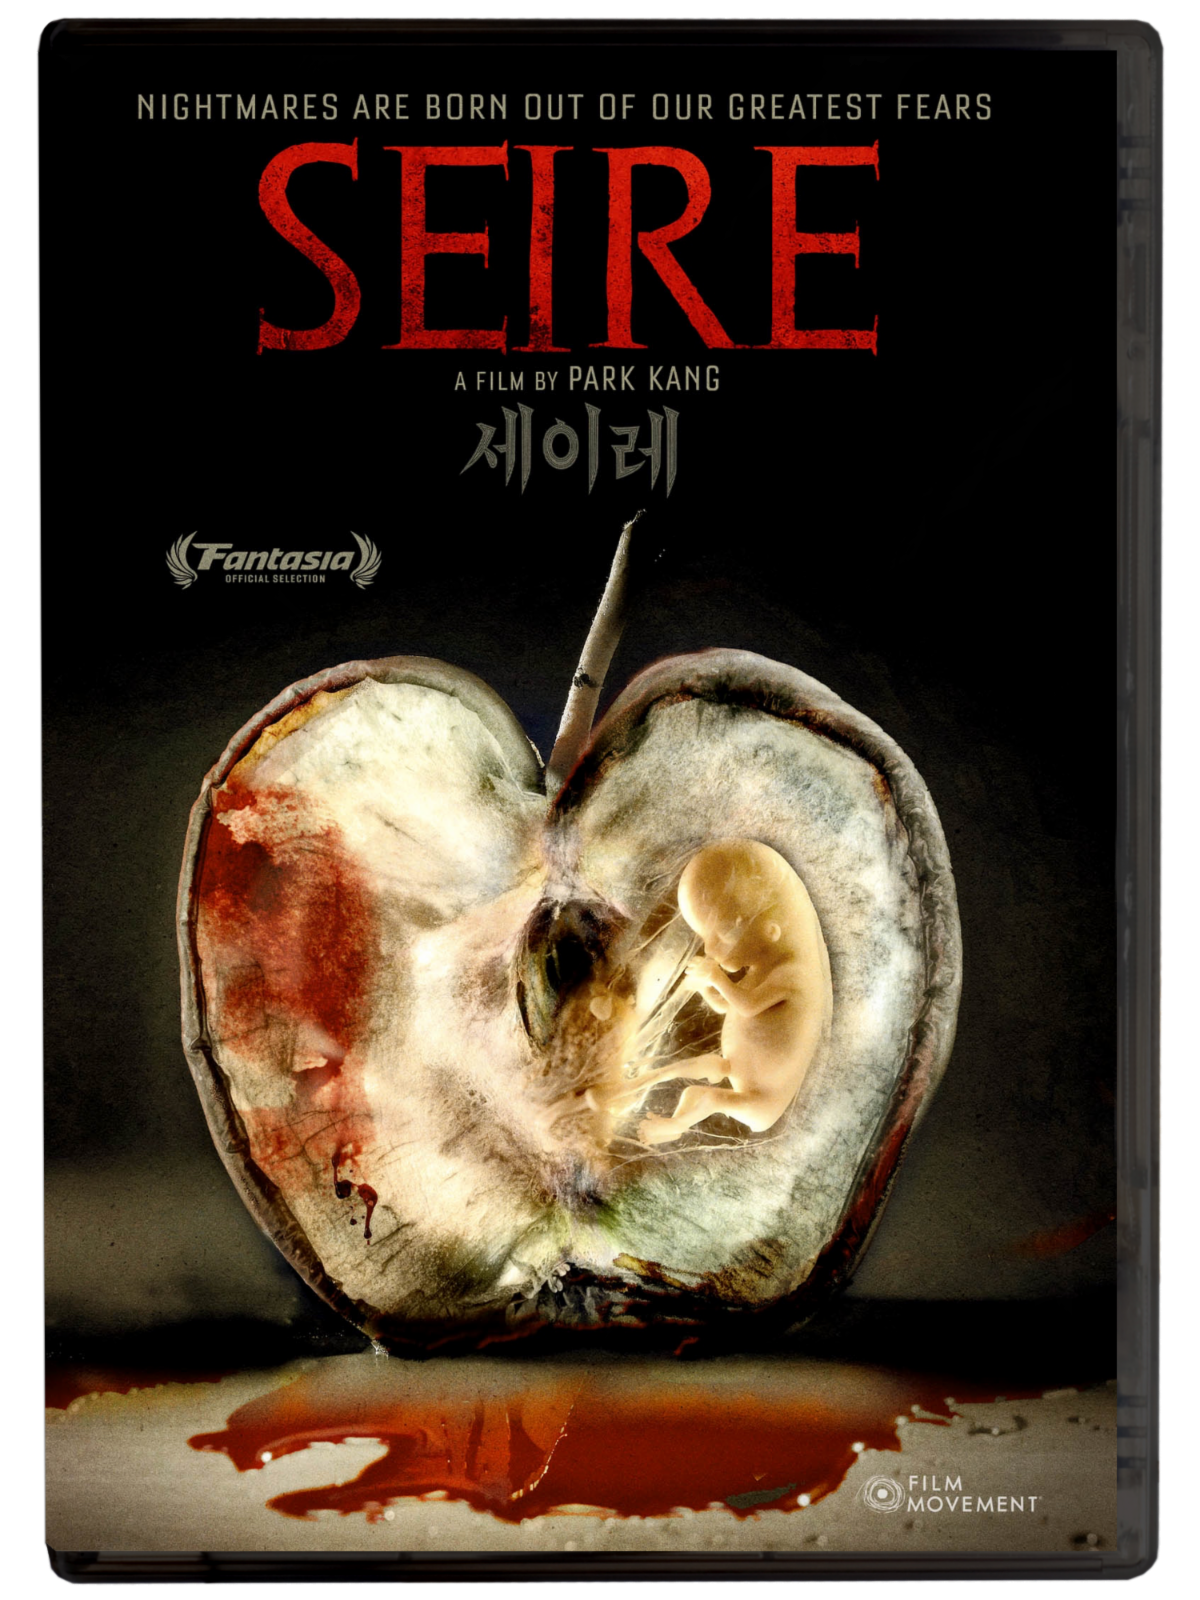 Horror movie fans will love Siere, a suspenseful Korean horror film that will keep you on the edge of your seat as the plot unfolds.